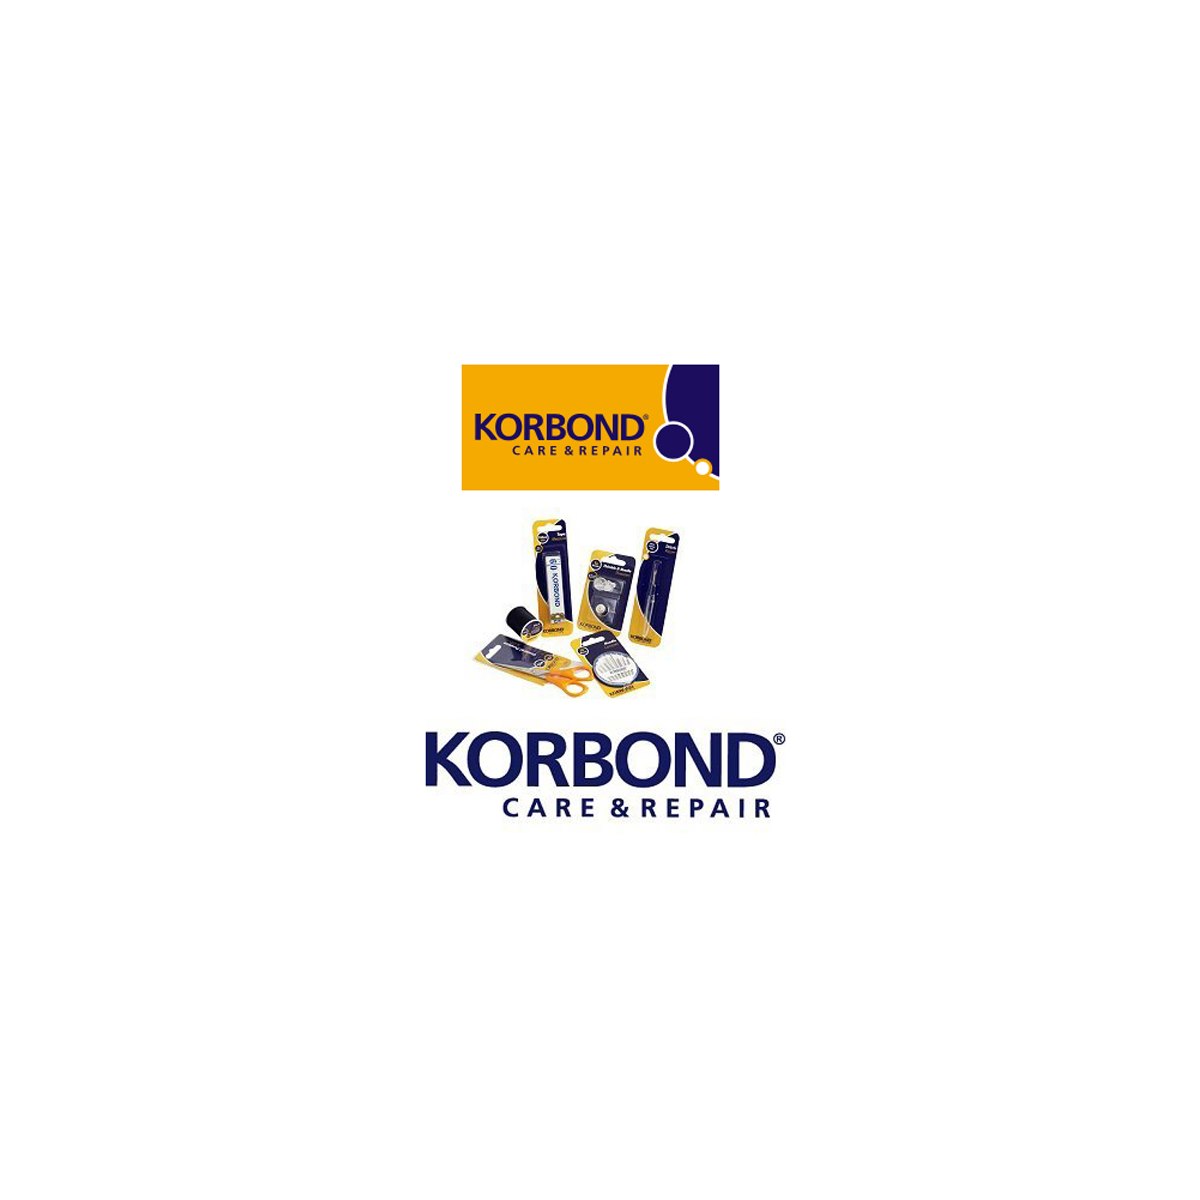 Where to Buy Korbond Products